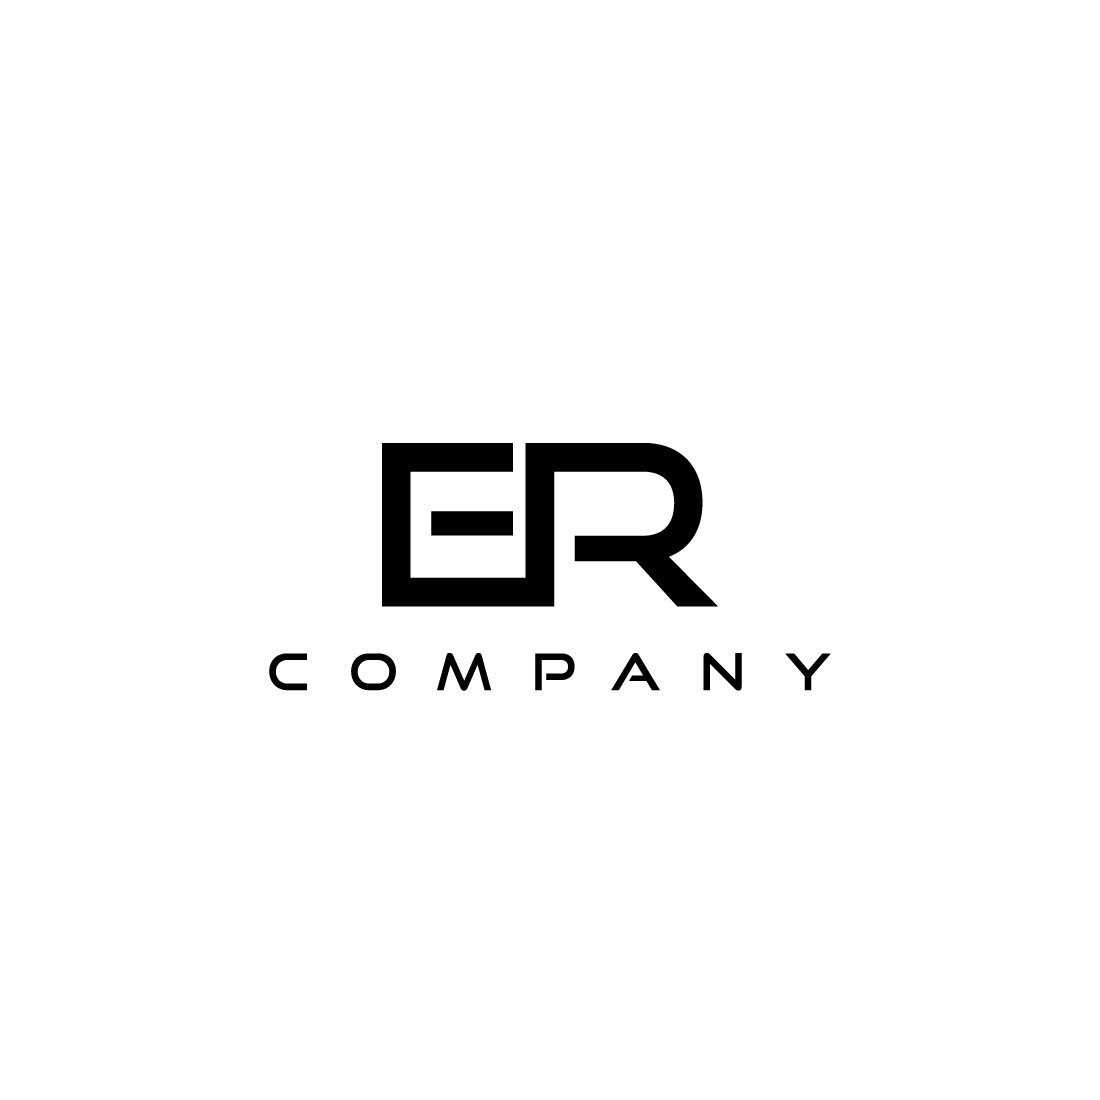 ER letter mark logo with a modern look preview image.